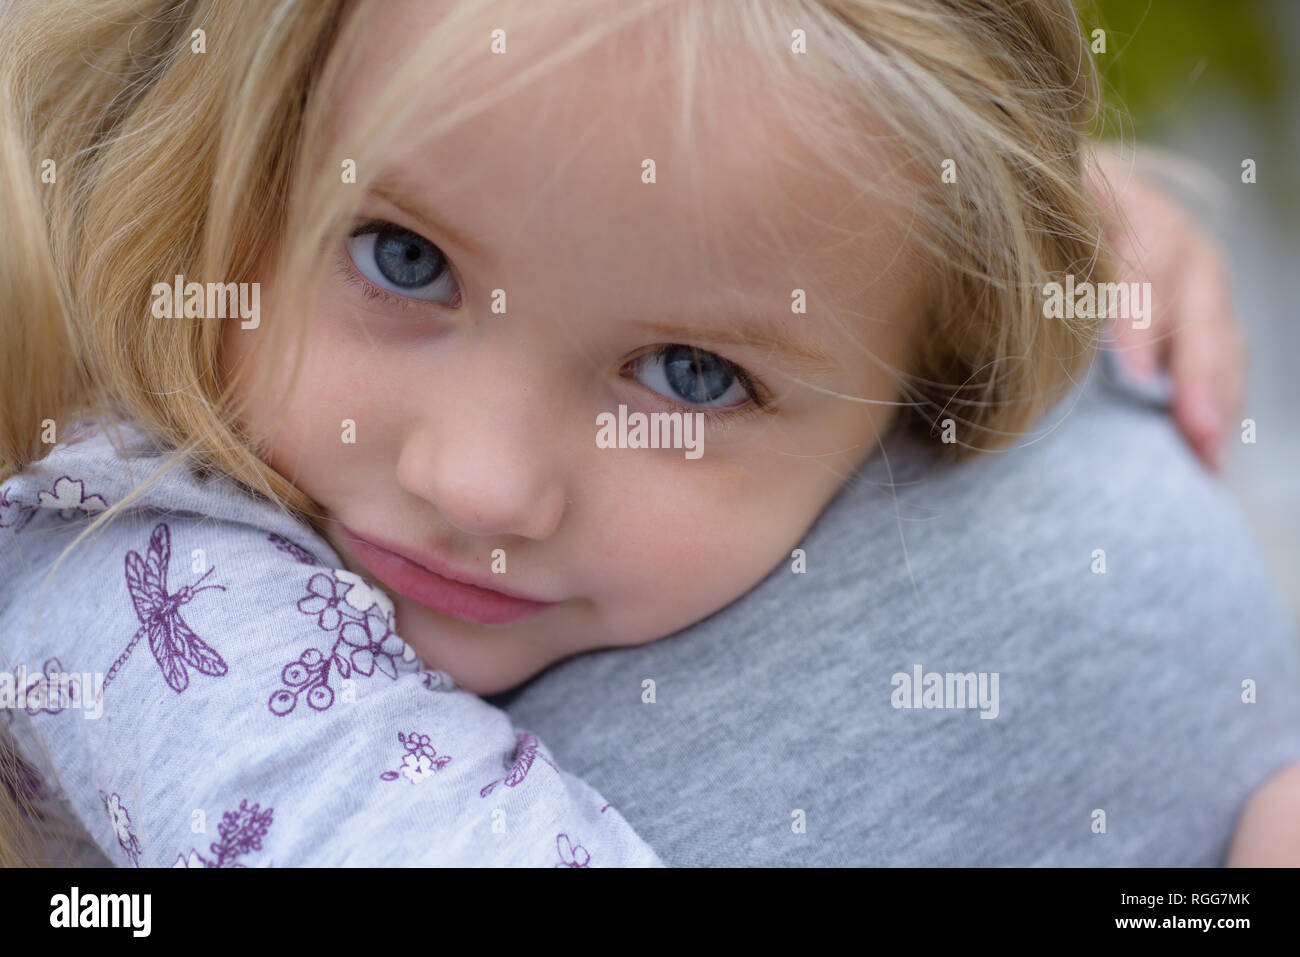 Love In Family Childhood Summer Mothers Day Childrens Day Small Baby Girl New Life Concept Family Values I Love You Little Girl Embrace Her Stock Photo Alamy